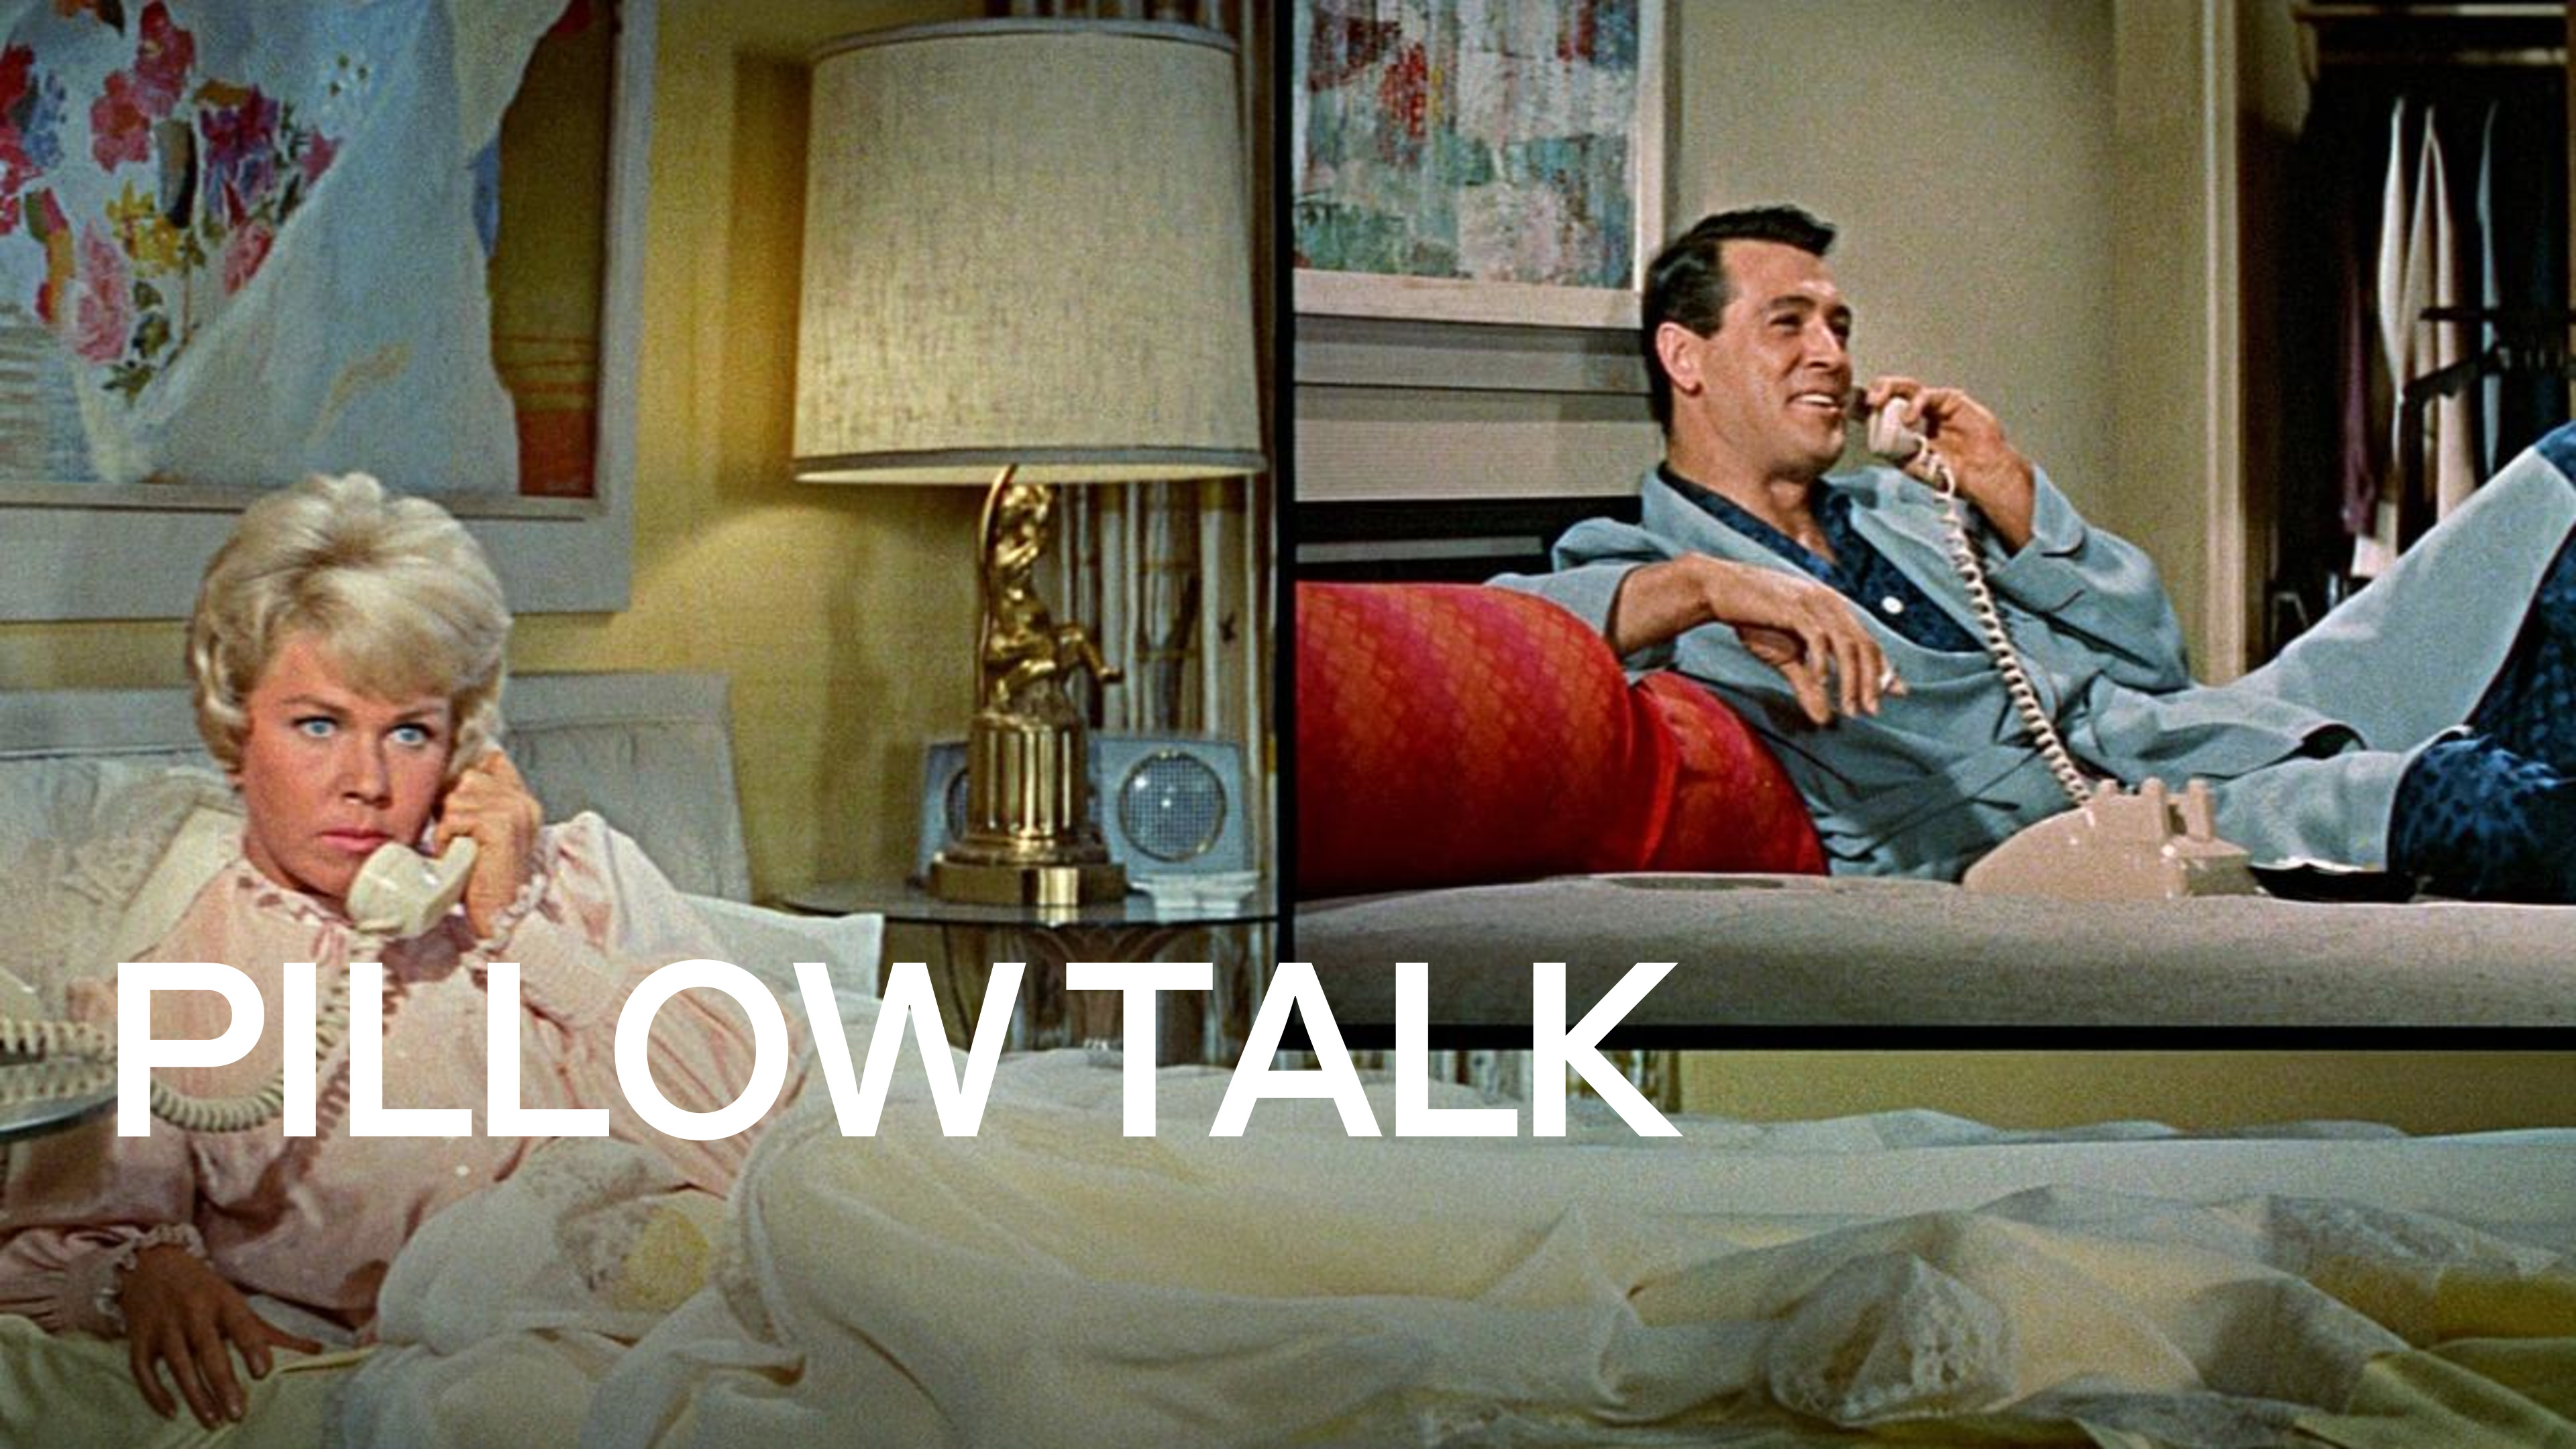 36-facts-about-the-movie-pillow-talk